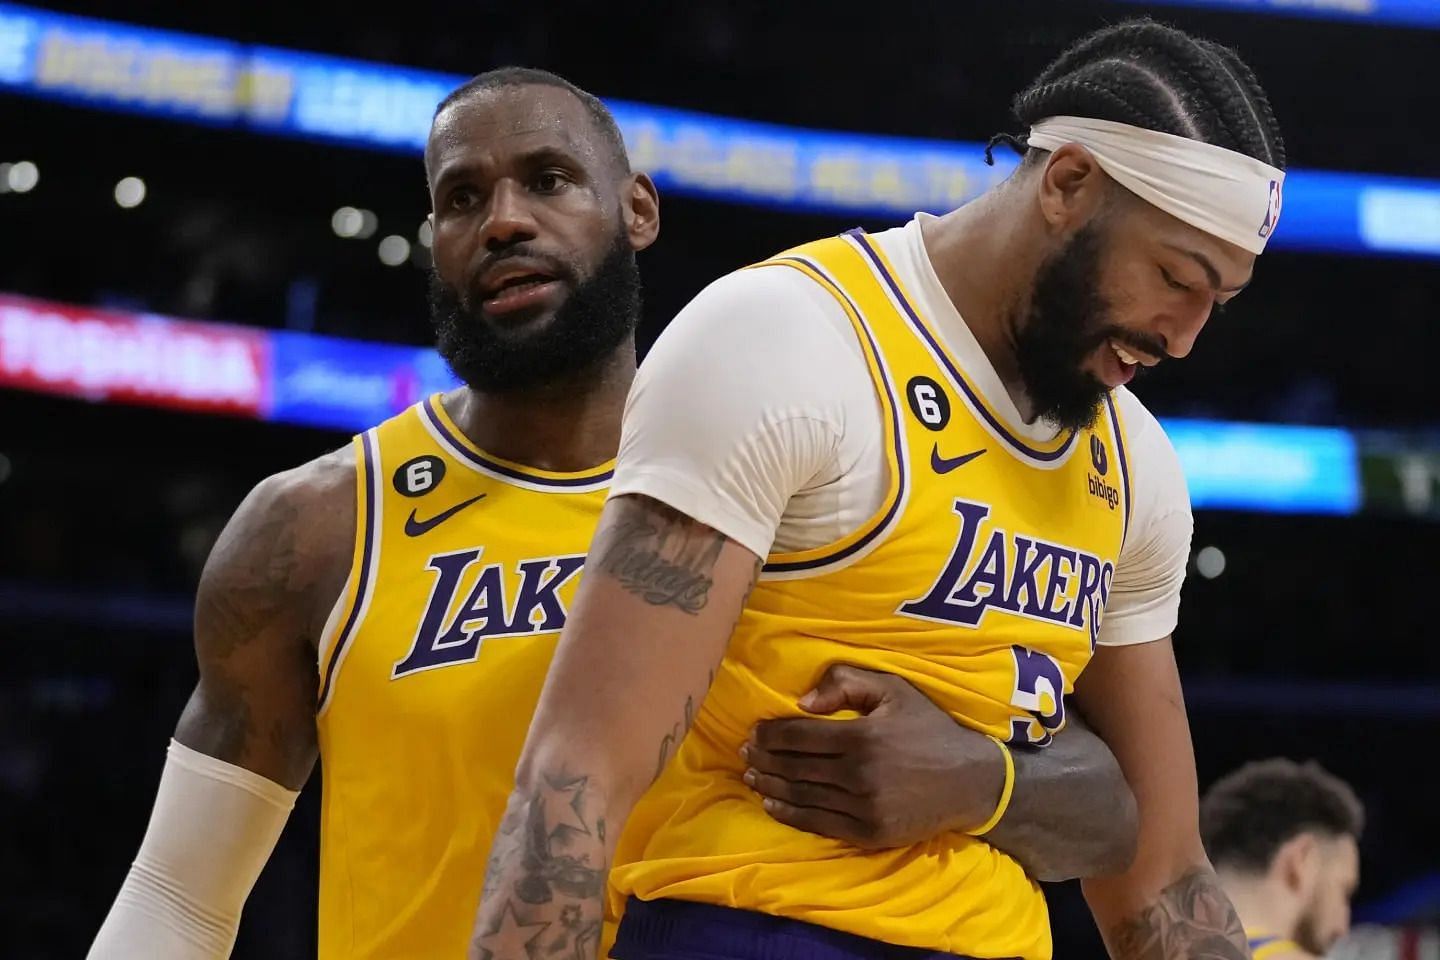 LeBron James (left) and Anthony Davis (right) are expected to play Wednesday vs the Dallas Mavericks (AP Photo/Ashley Landis)